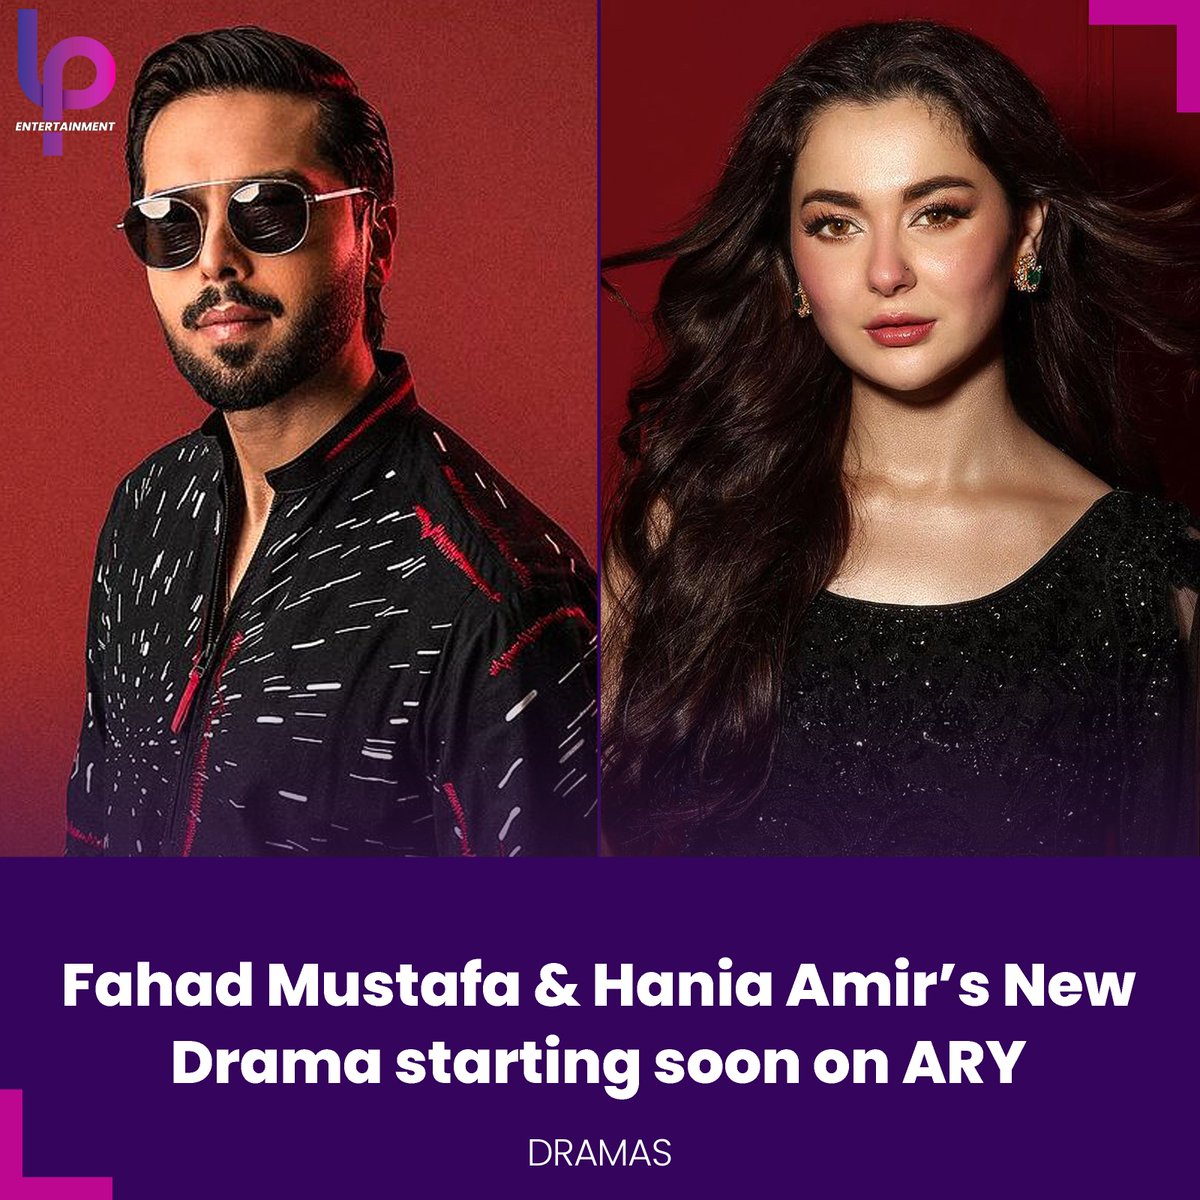 The much-awaited drama serial #KabhiMaiKabhiTum starring #FahadMustafa and #HaniaAamir is starting soon on ARY Digital.
The shoot is already in place and drama will be on air after Eid, replacing #BurnsRoadKayRomeoJuliet.
Directed by Badir Mehmood.

#LPEntertainment